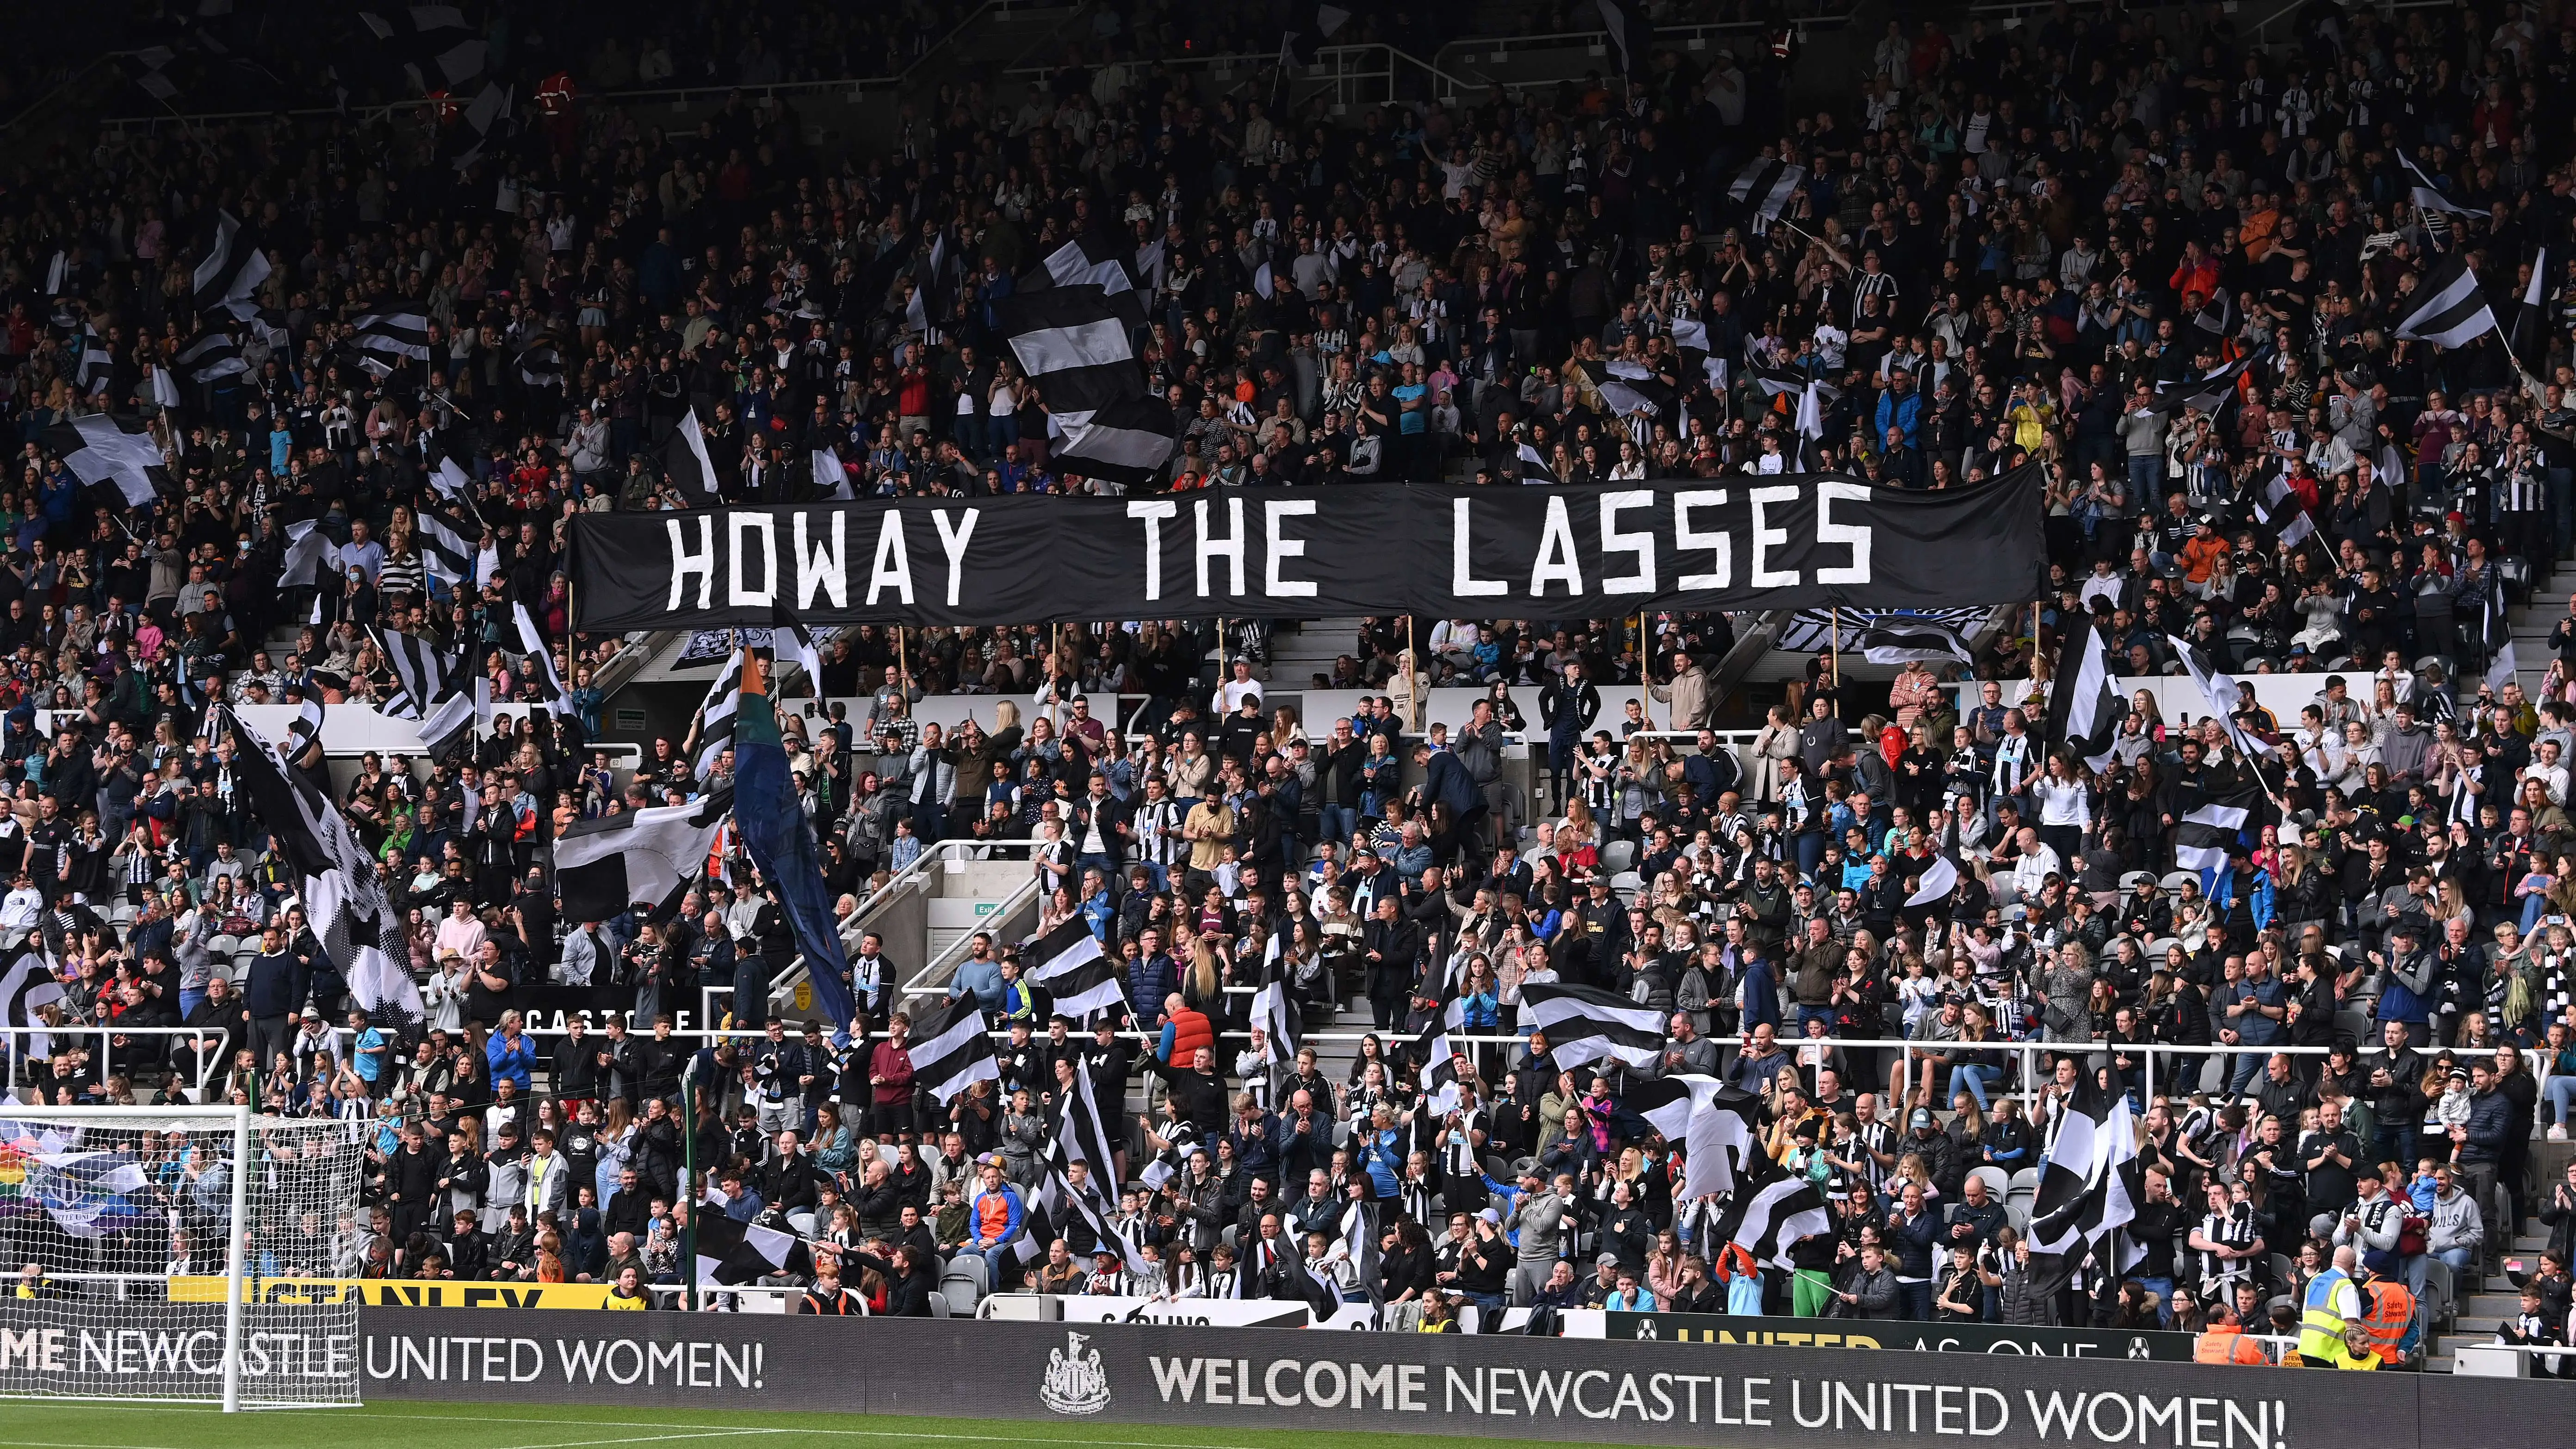 howay-the-lasses-banner